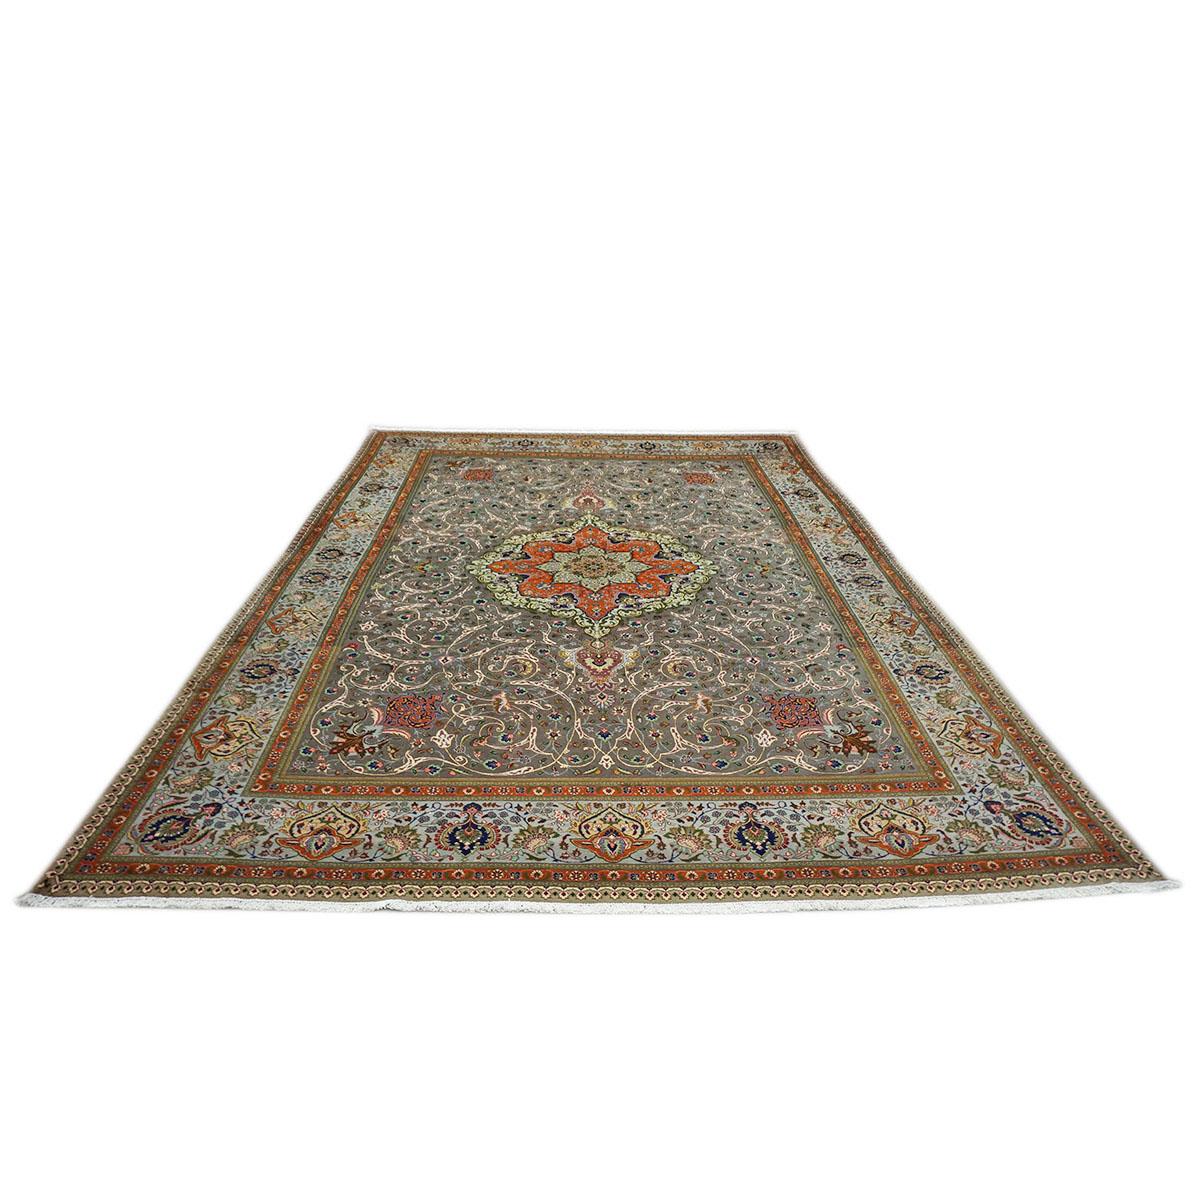 A fine woven 1940s Persian Tabriz with Grey field populated with fine detailed medallion floral designs.
Accent colors include light green, taupe, sage green, and light blue.
The rug is bounded by a burnt orange and light blue floral border. Has